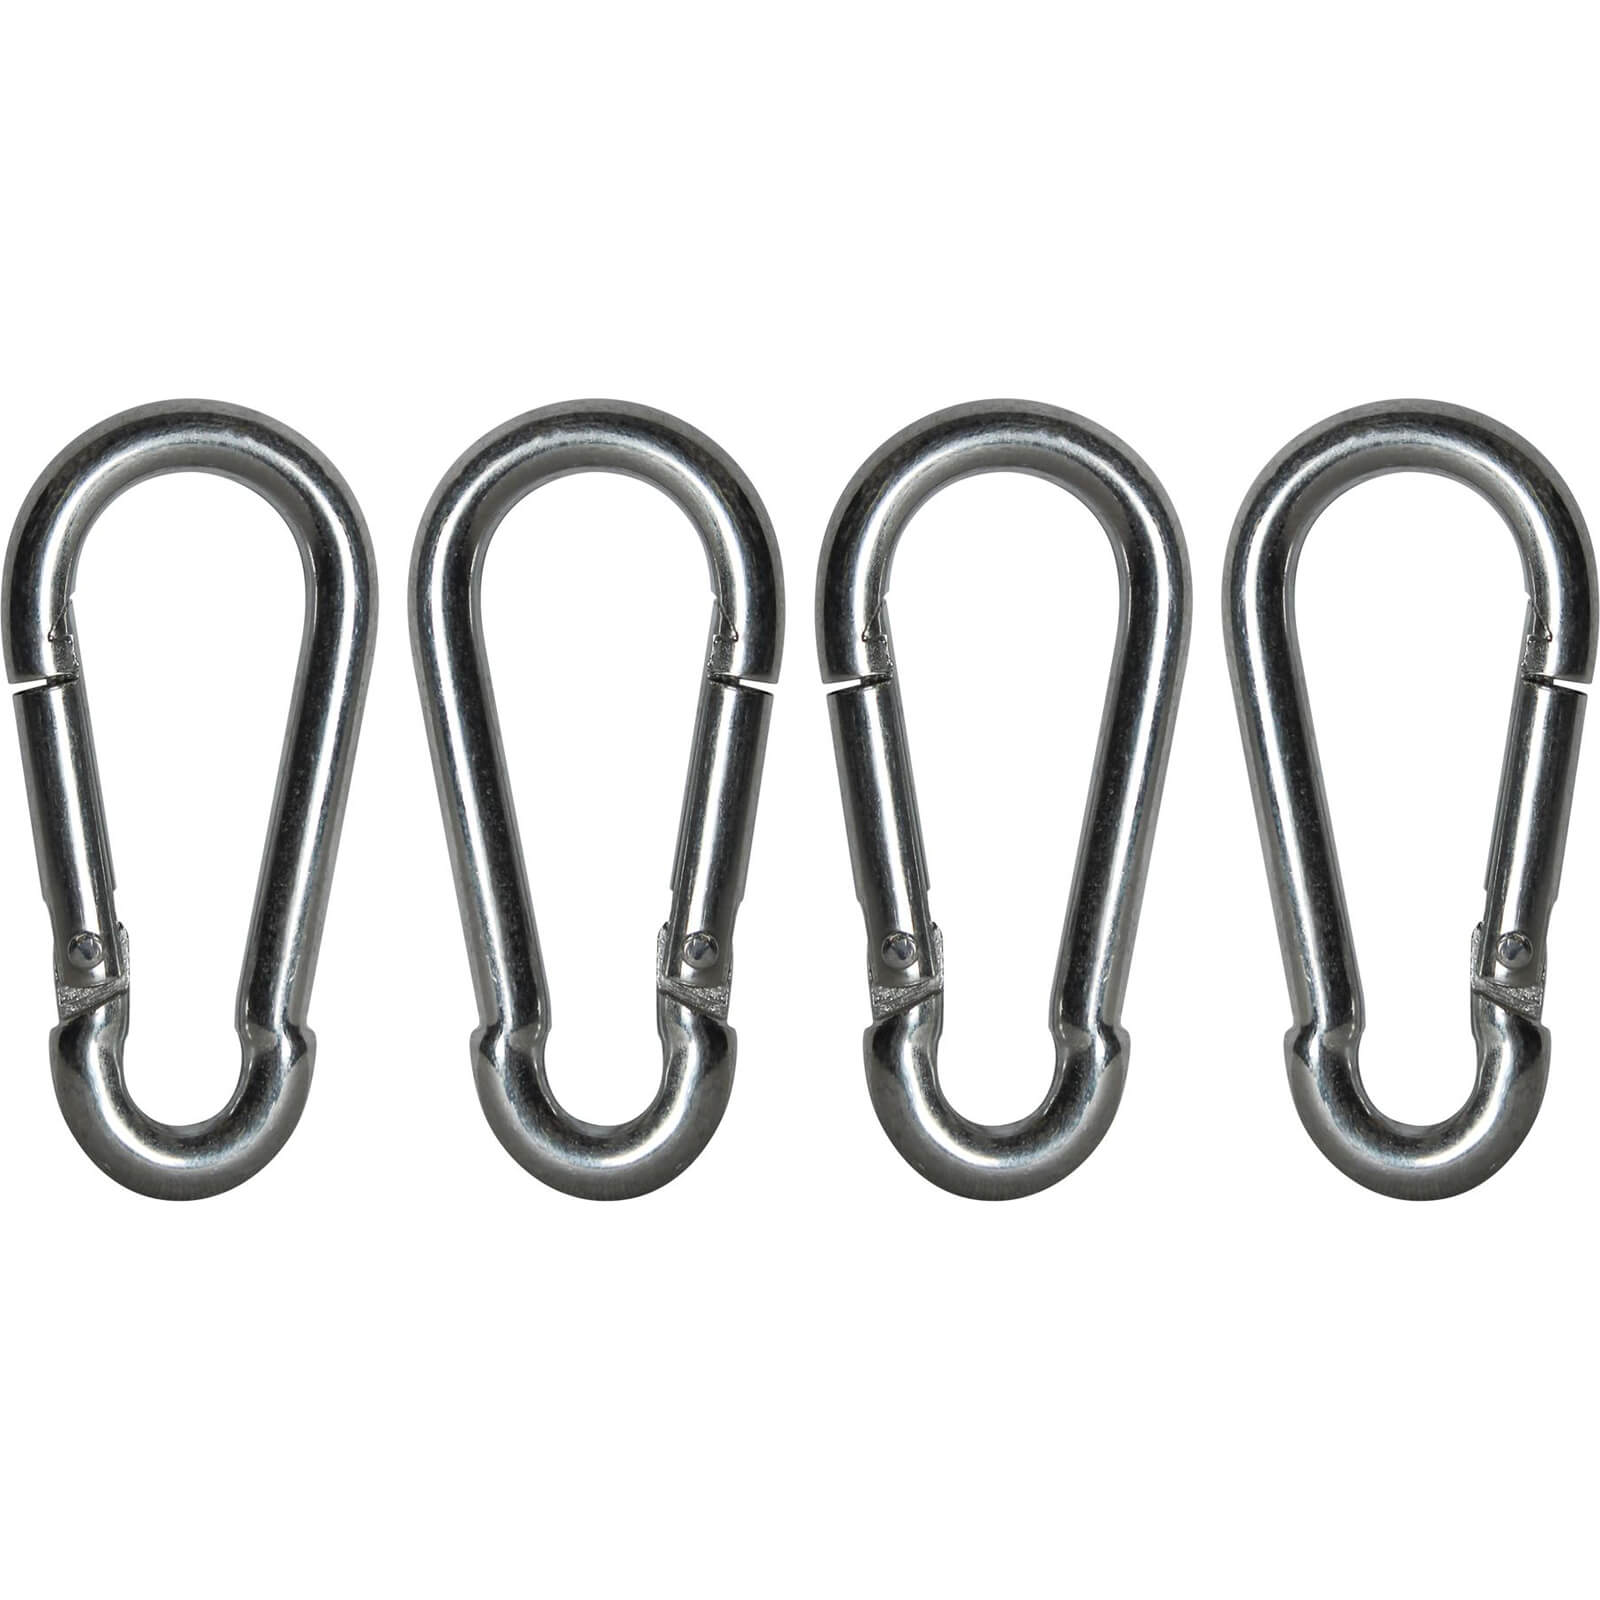 Photo of Faithfull Zinc Plated Fire Brigade Snap Hook Carabiner 6mm Pack Of 4